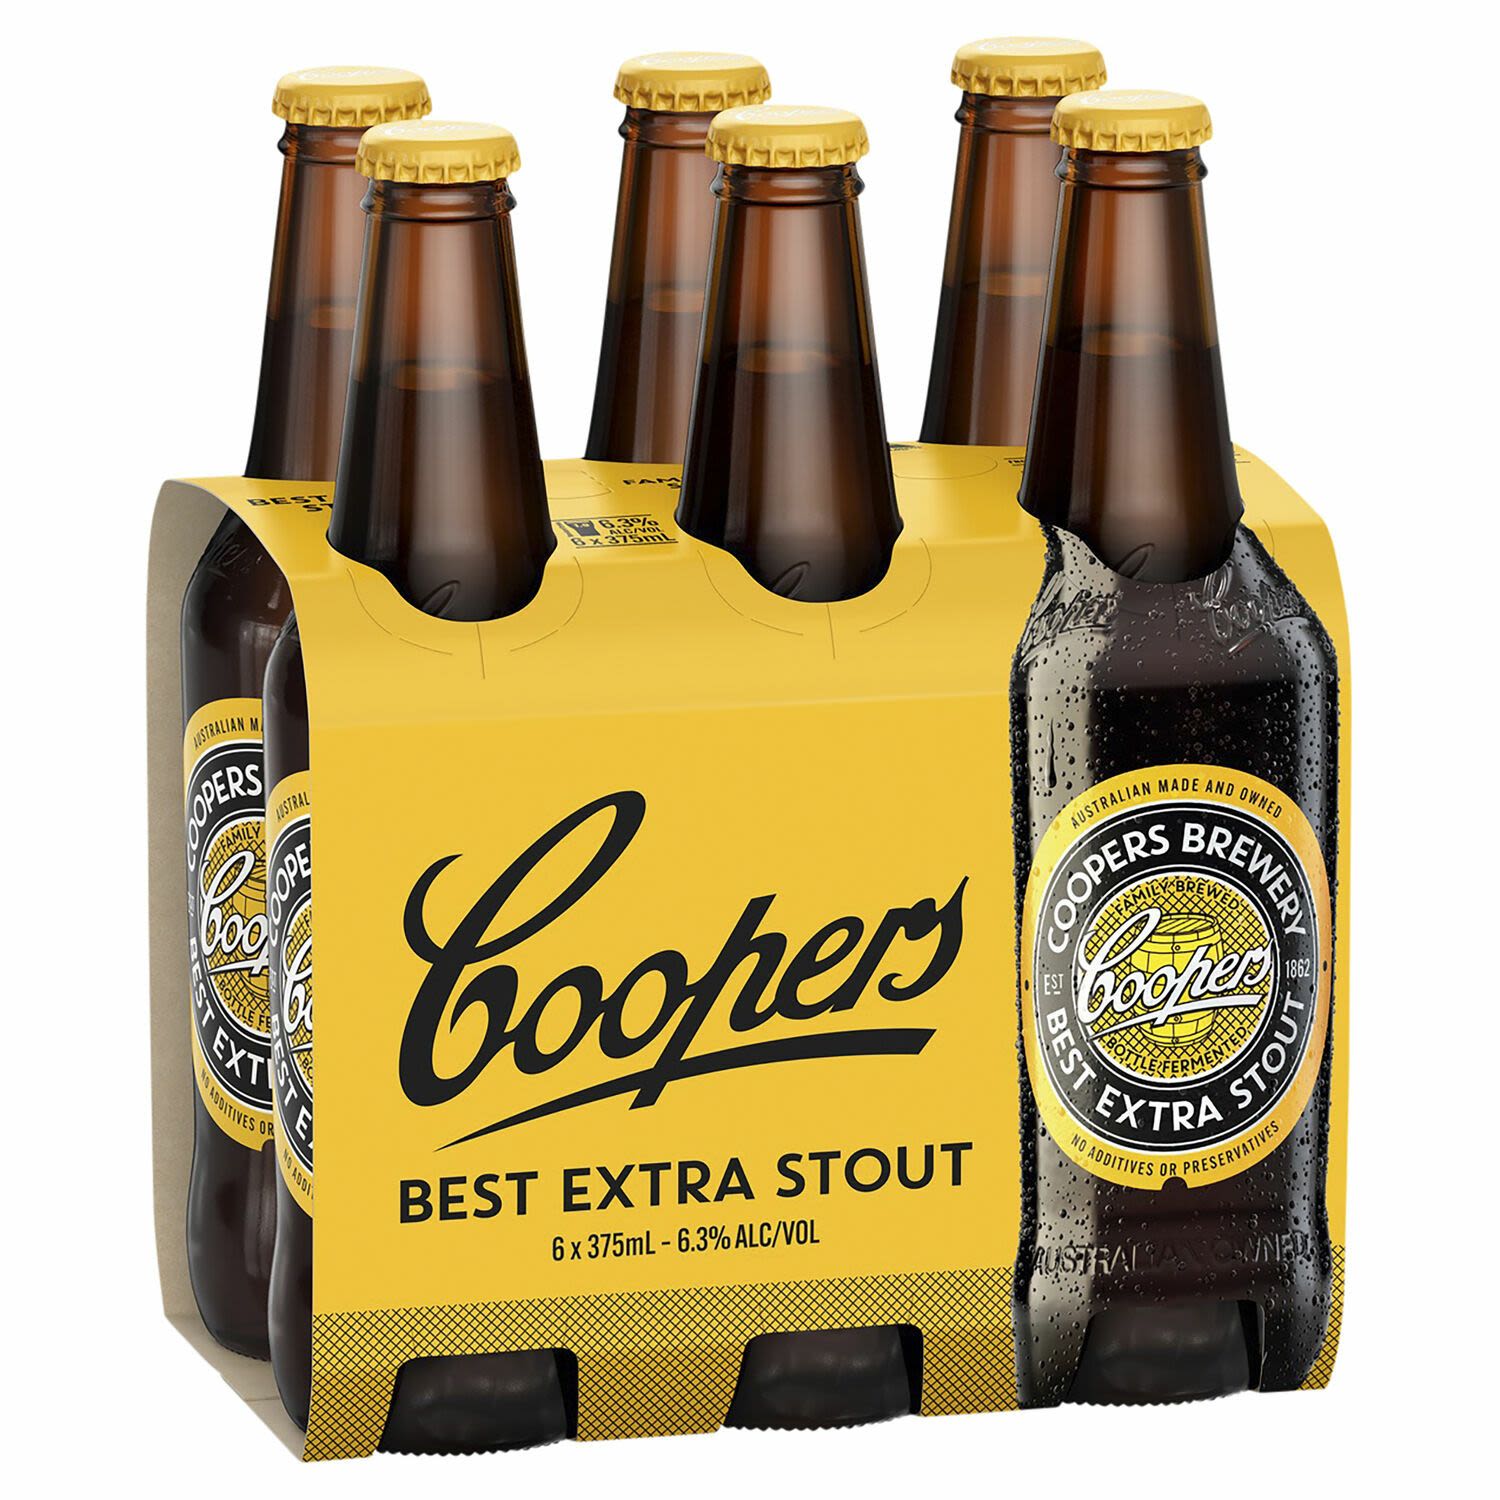 Coopers Best Extra Stout Bottle 375mL 6 Pack